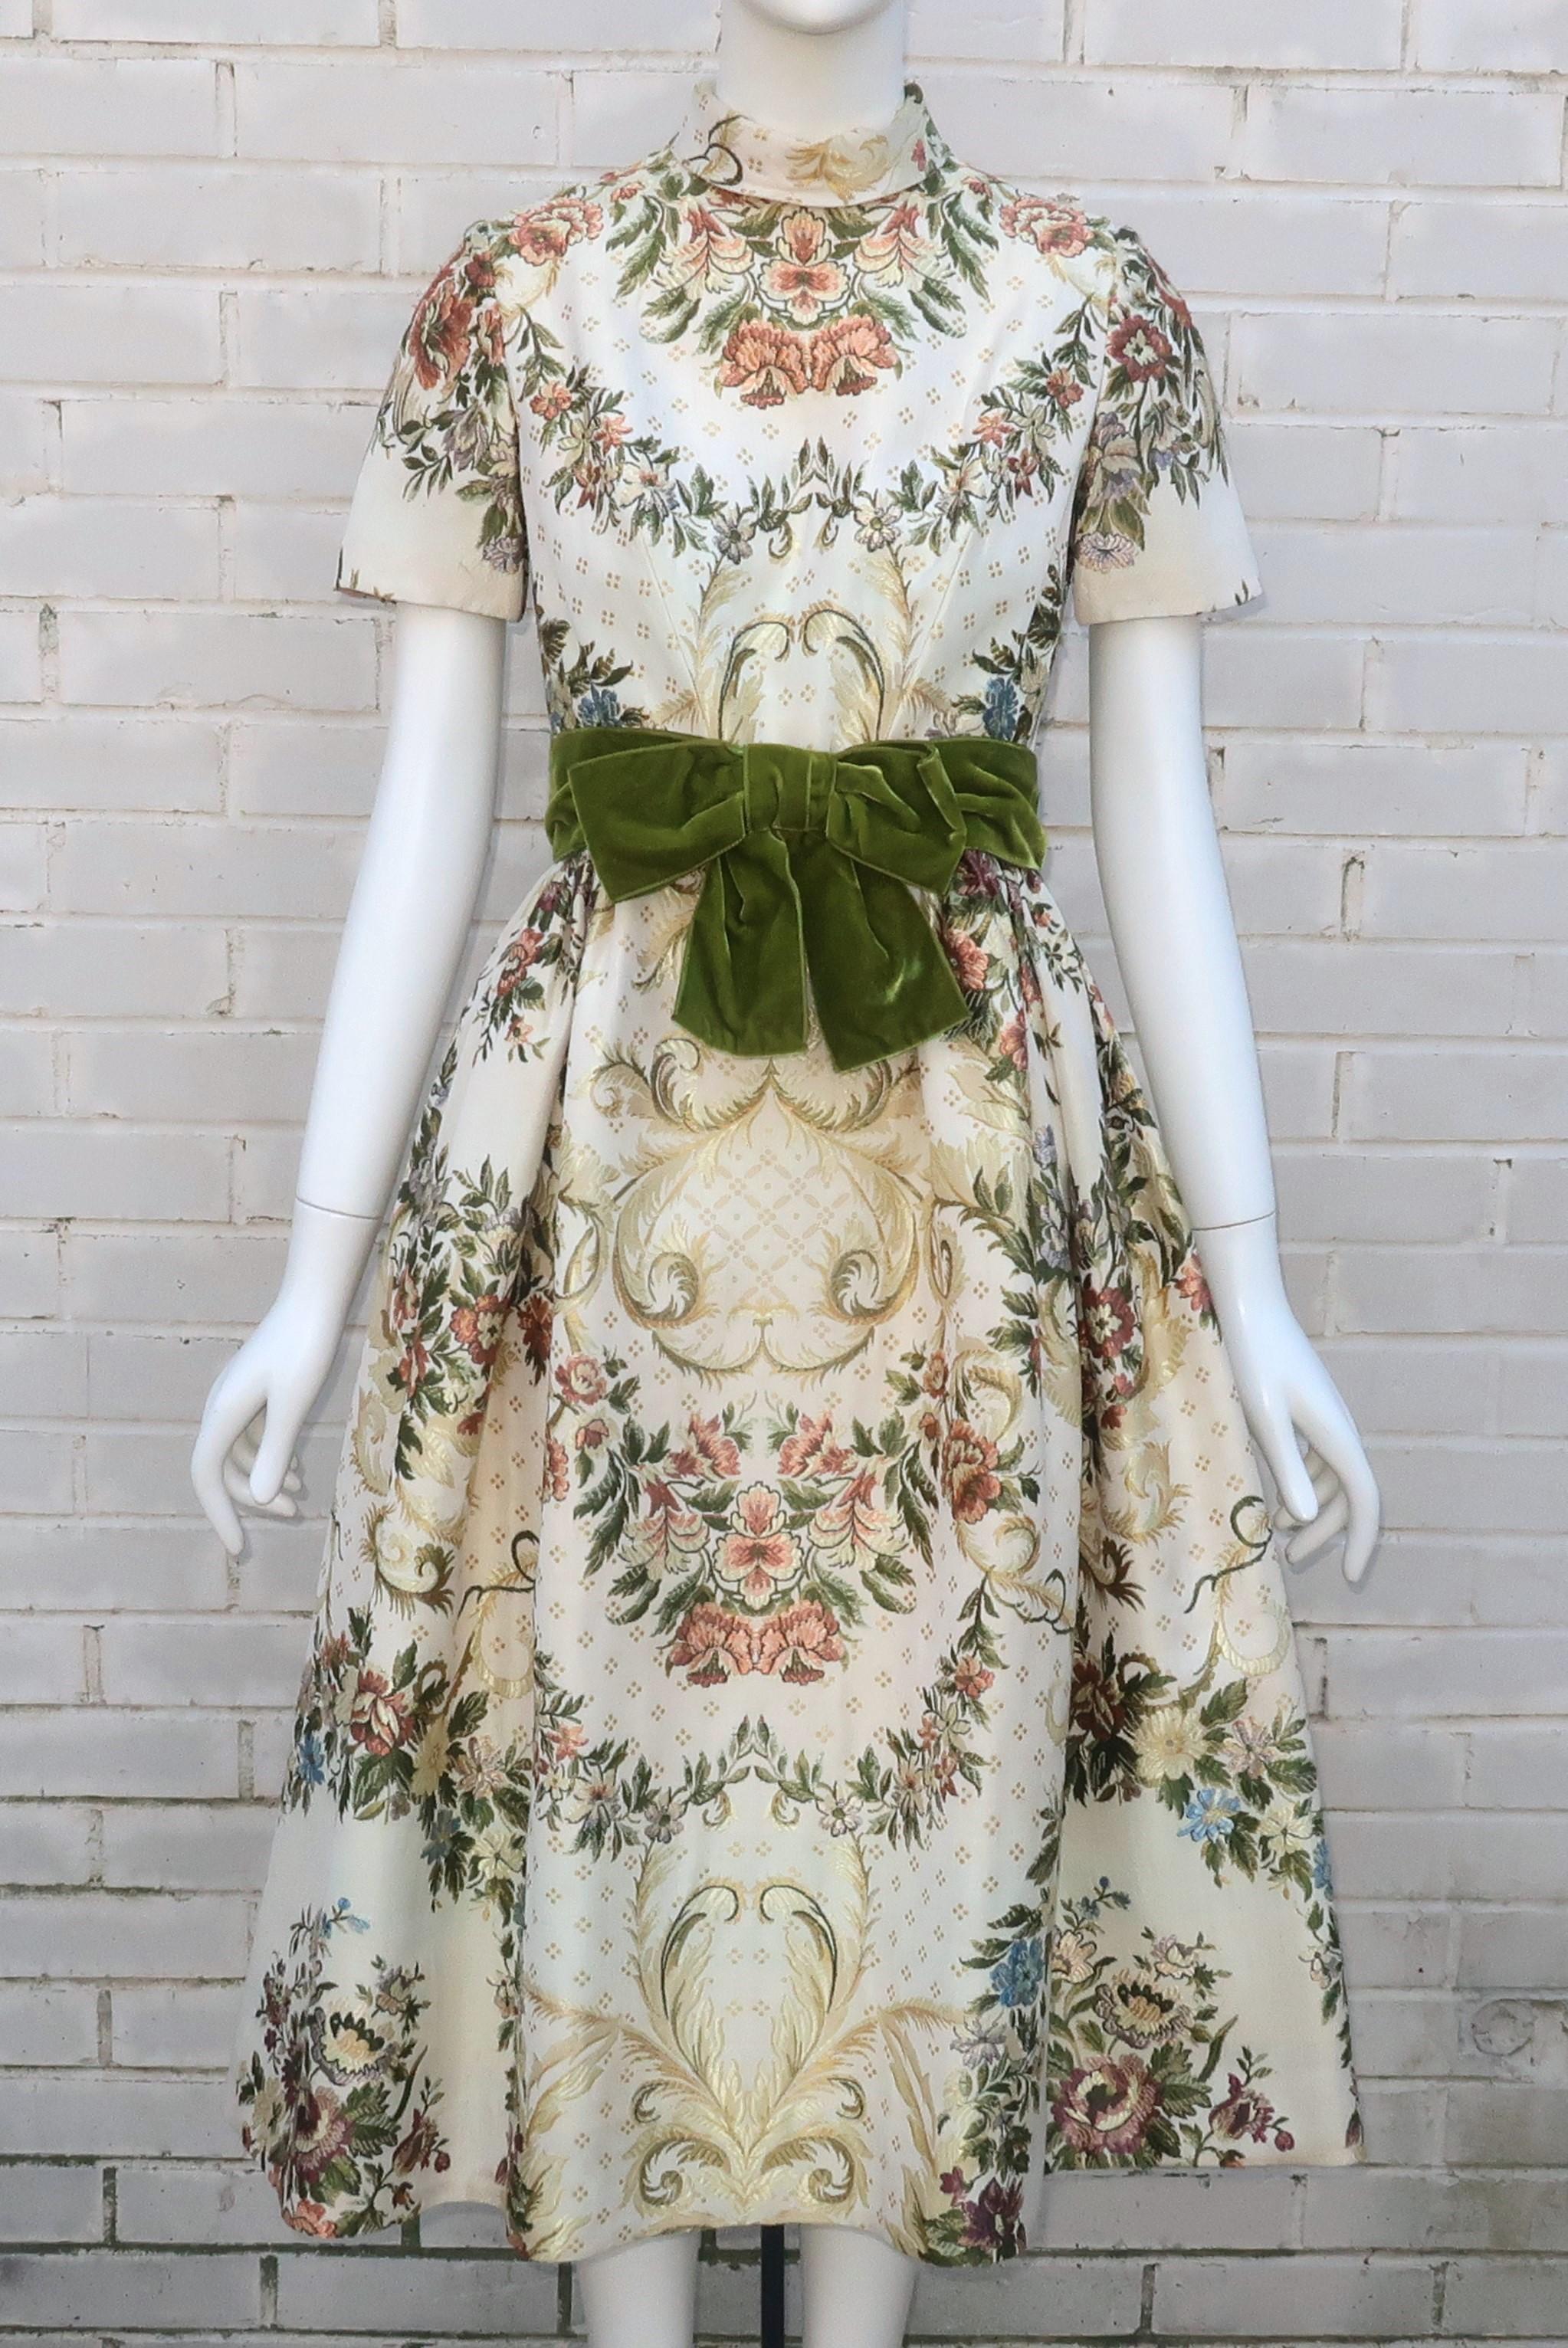 1950’s Travilla ornate brocade dress with a built-in velvet bow belt.  The rolled collar dress zips and hooks at the back with hooks and snaps at the belt.  The gorgeous fabric is an upholstery weight with details reminiscent of 18th Century French